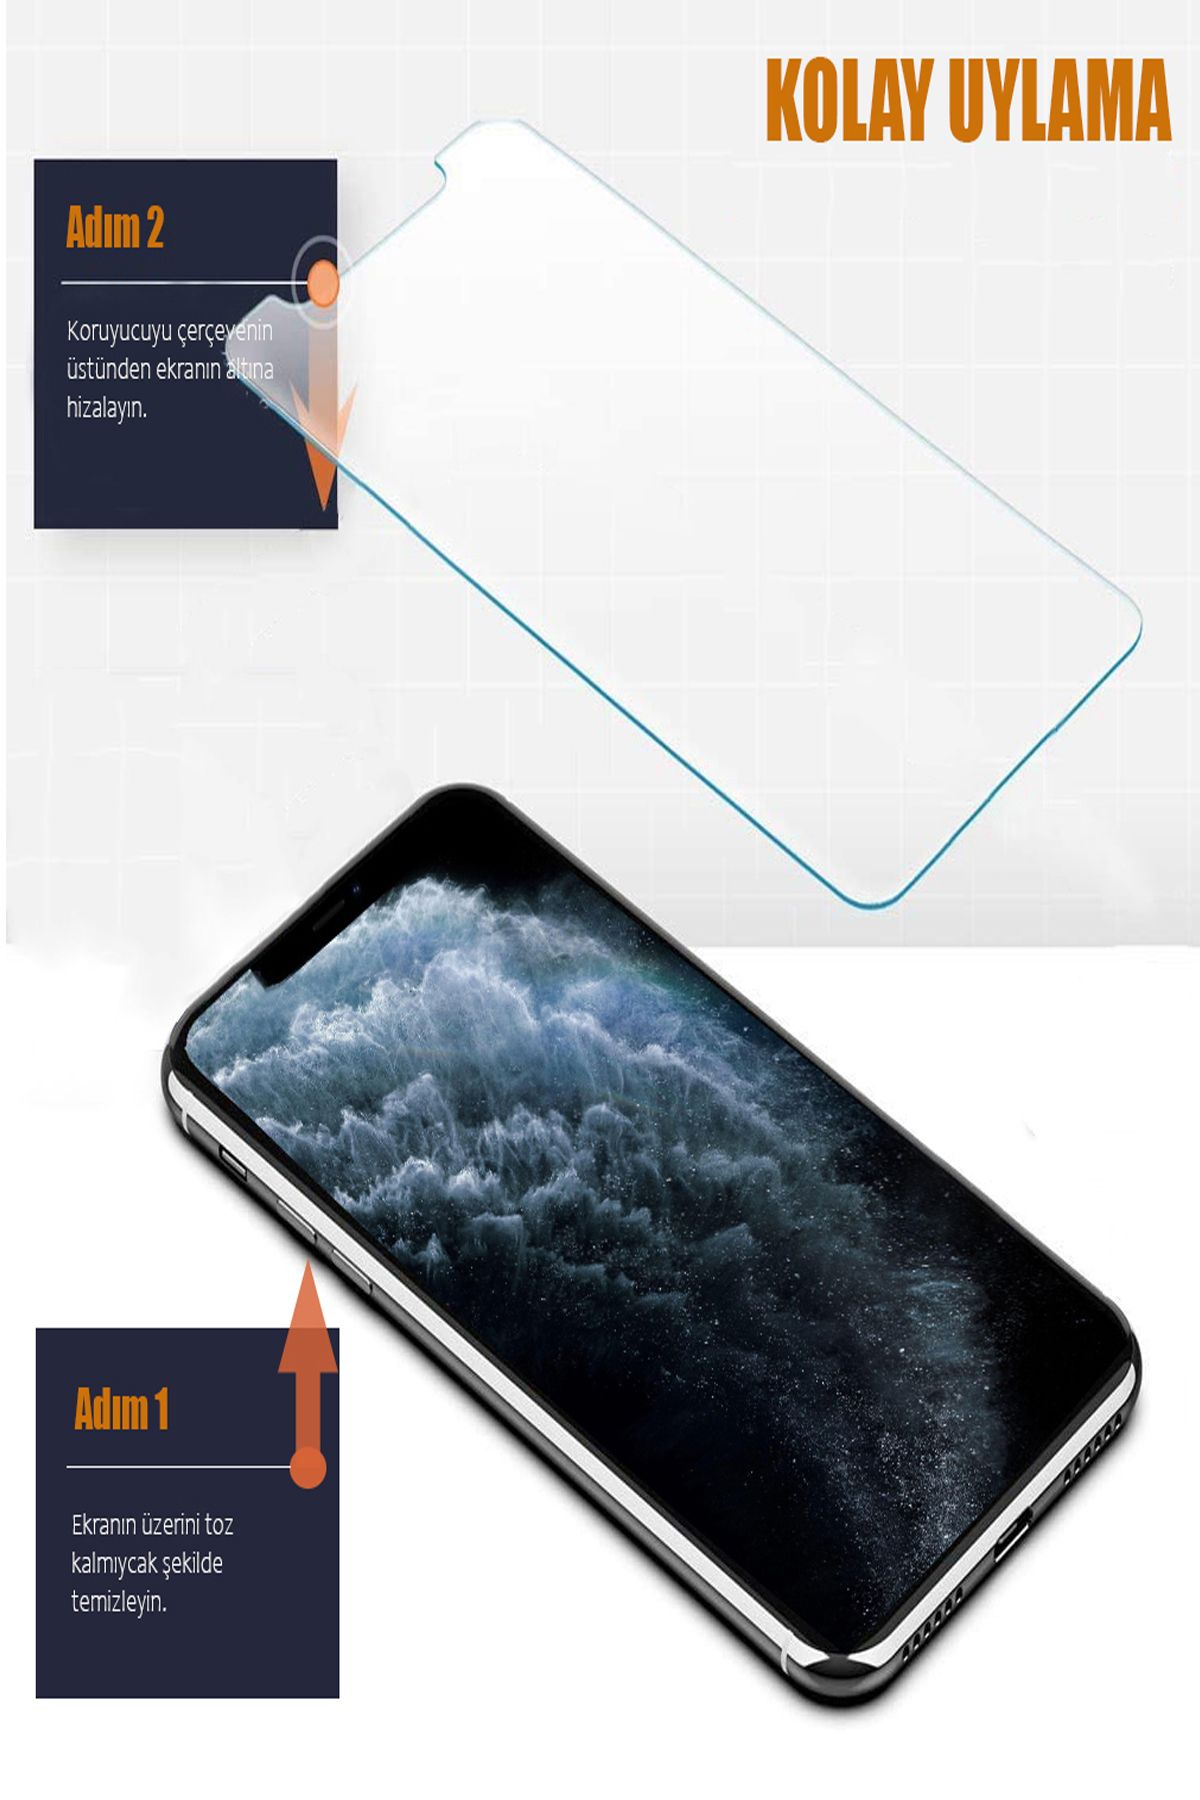 Xiaomi 13T/13T Pro Tempered Glass Screen Protector - Case Friendly